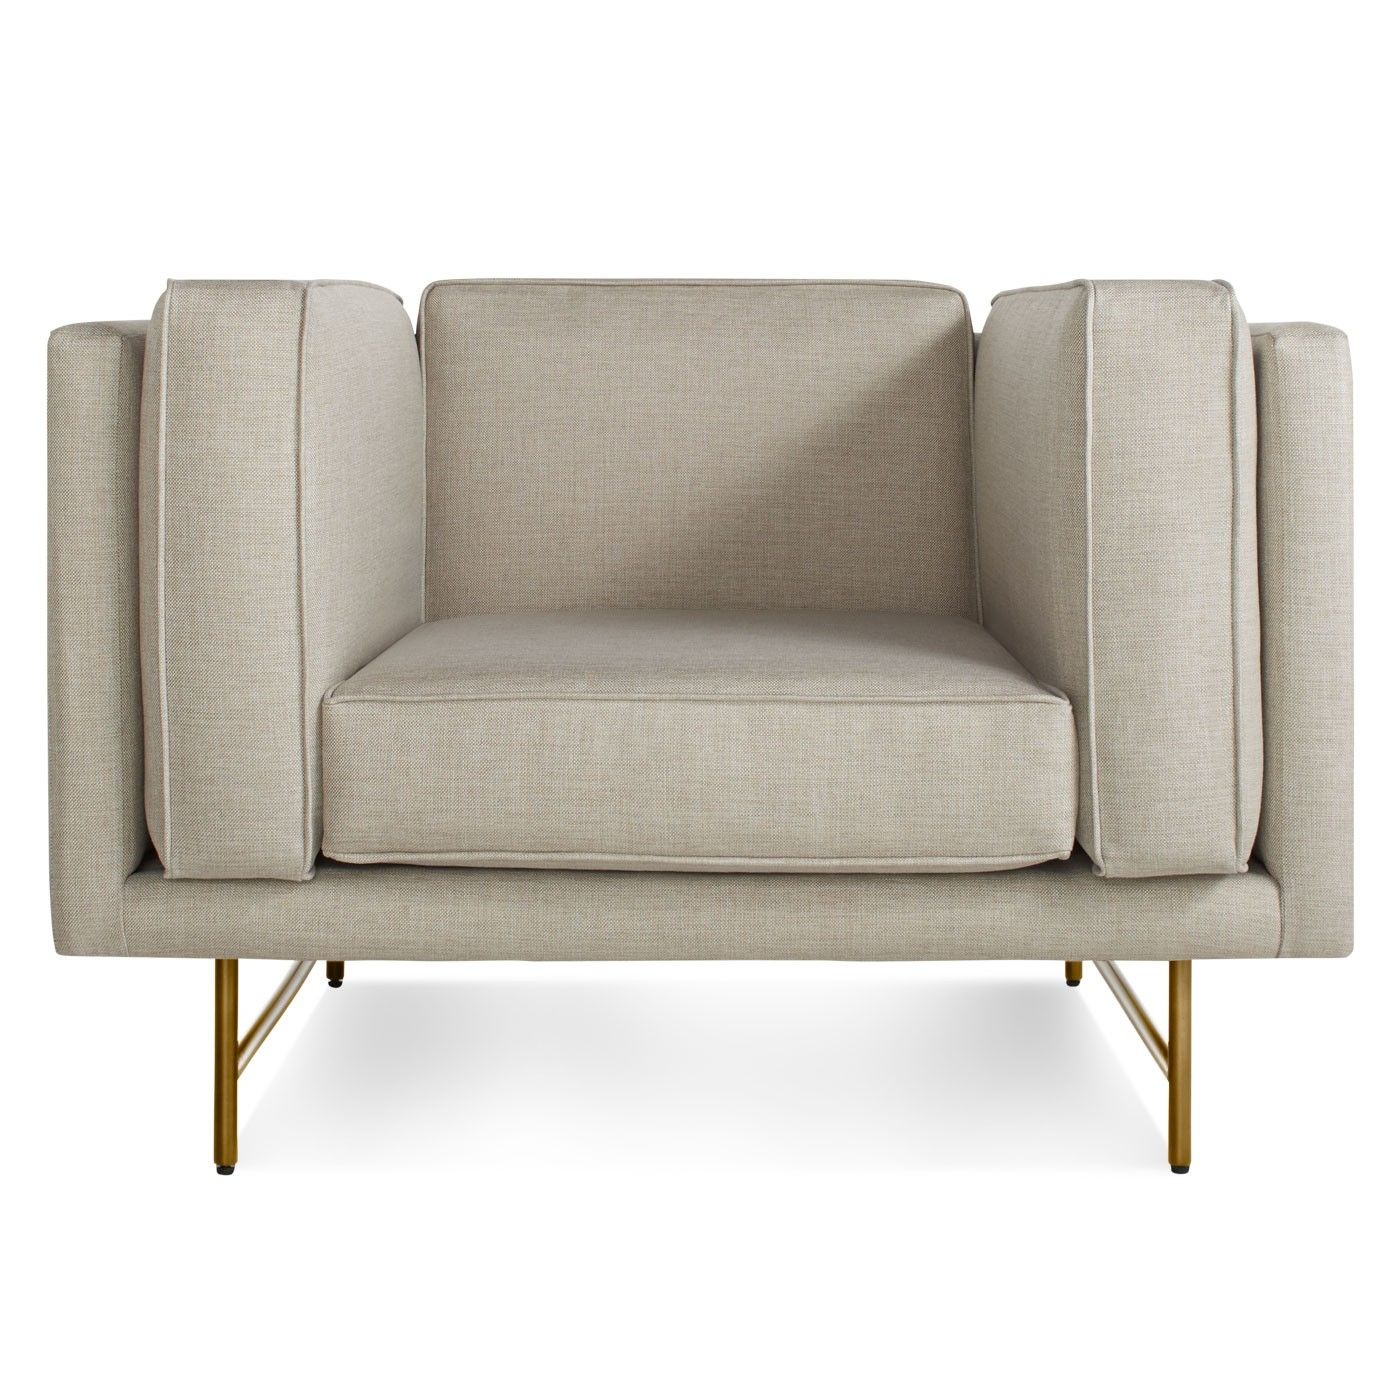 Bank Upholstered Club Chair Modern Club Chair Blu Dot Pertaining To Sofa Lounge Chairs (View 12 of 14)